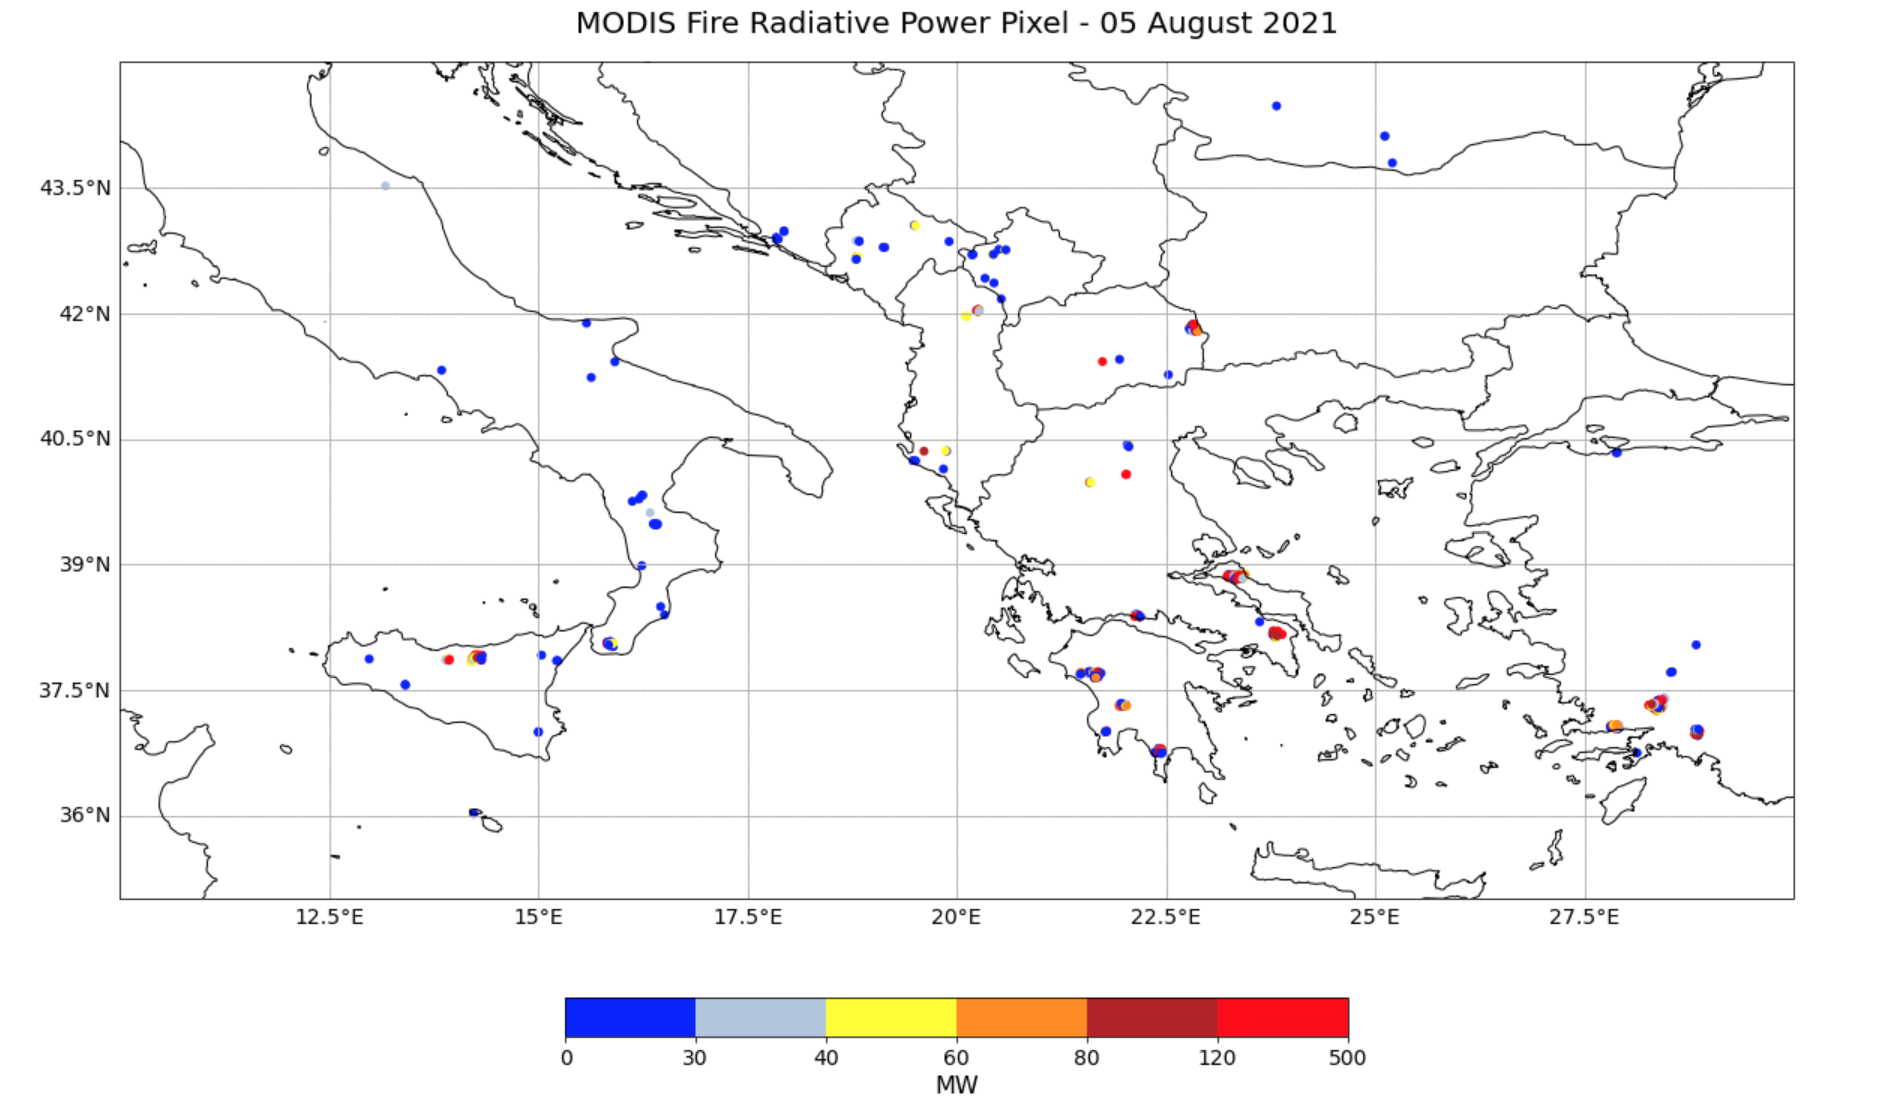 Figure 2. Fire radiative power from MODIS Thermal Anomalies/ Fire Locations data over Italy and Greece from 5 August 2021.